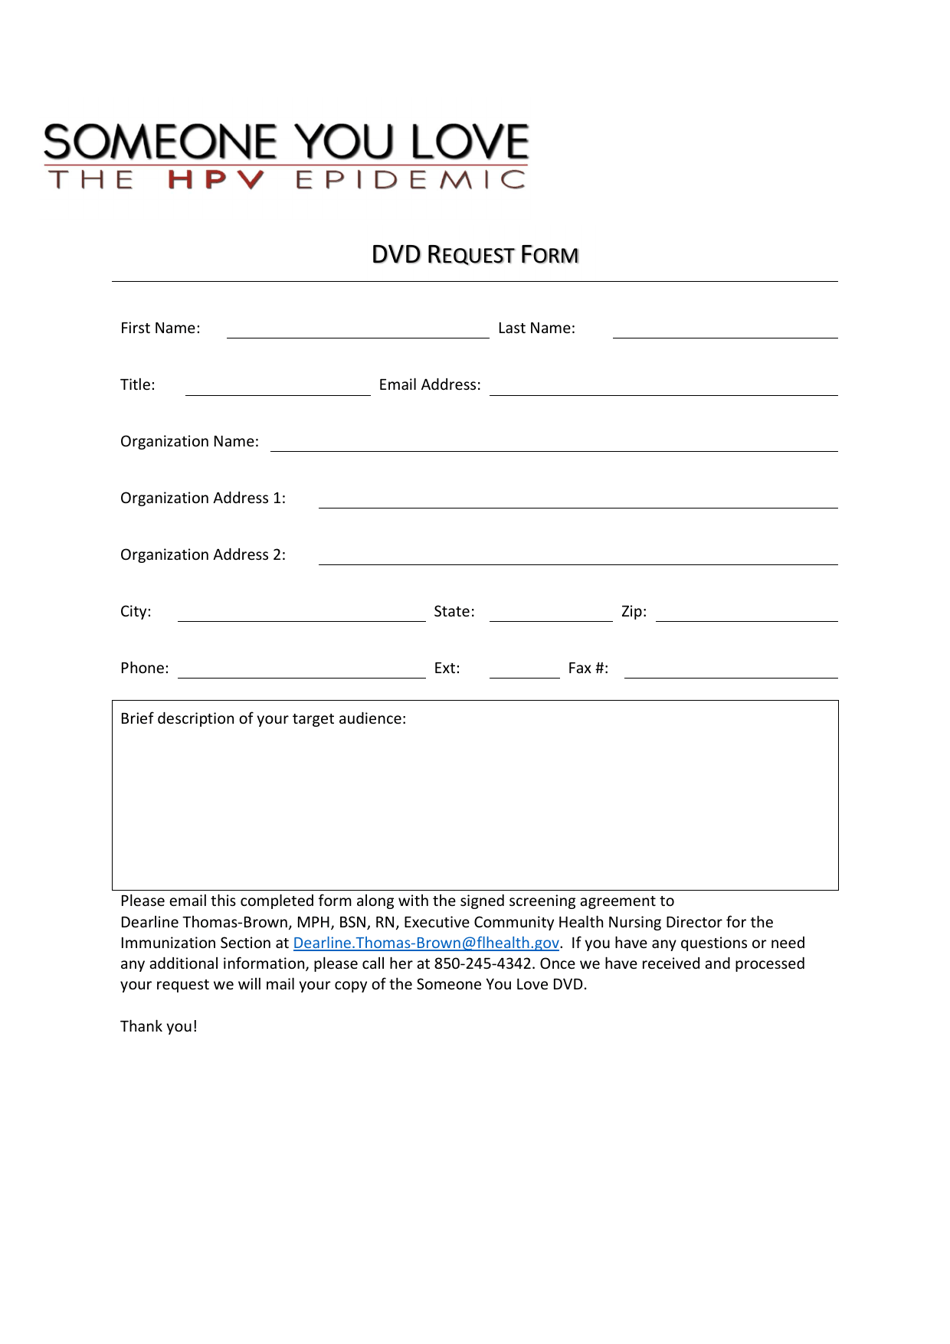 Dvd Request Form - Someone You Love: the Hpv Epidemic - Florida, Page 1